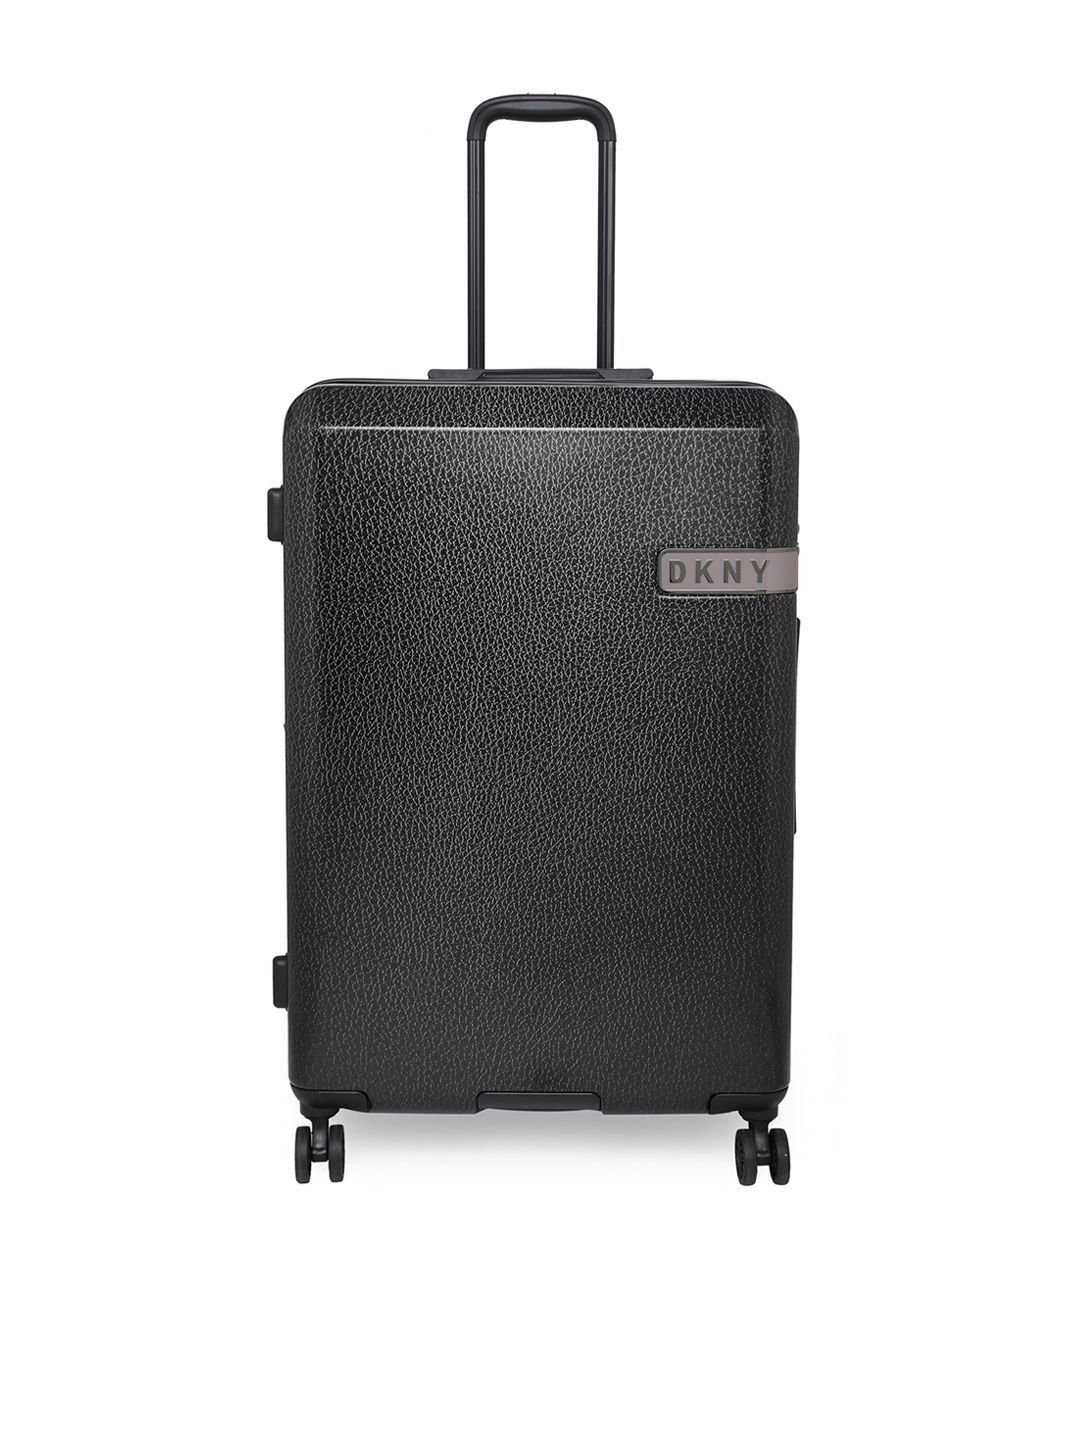 DKNY Black Textured Hard Case Large Combination Lock Suitcase Trolley Bag Price in India